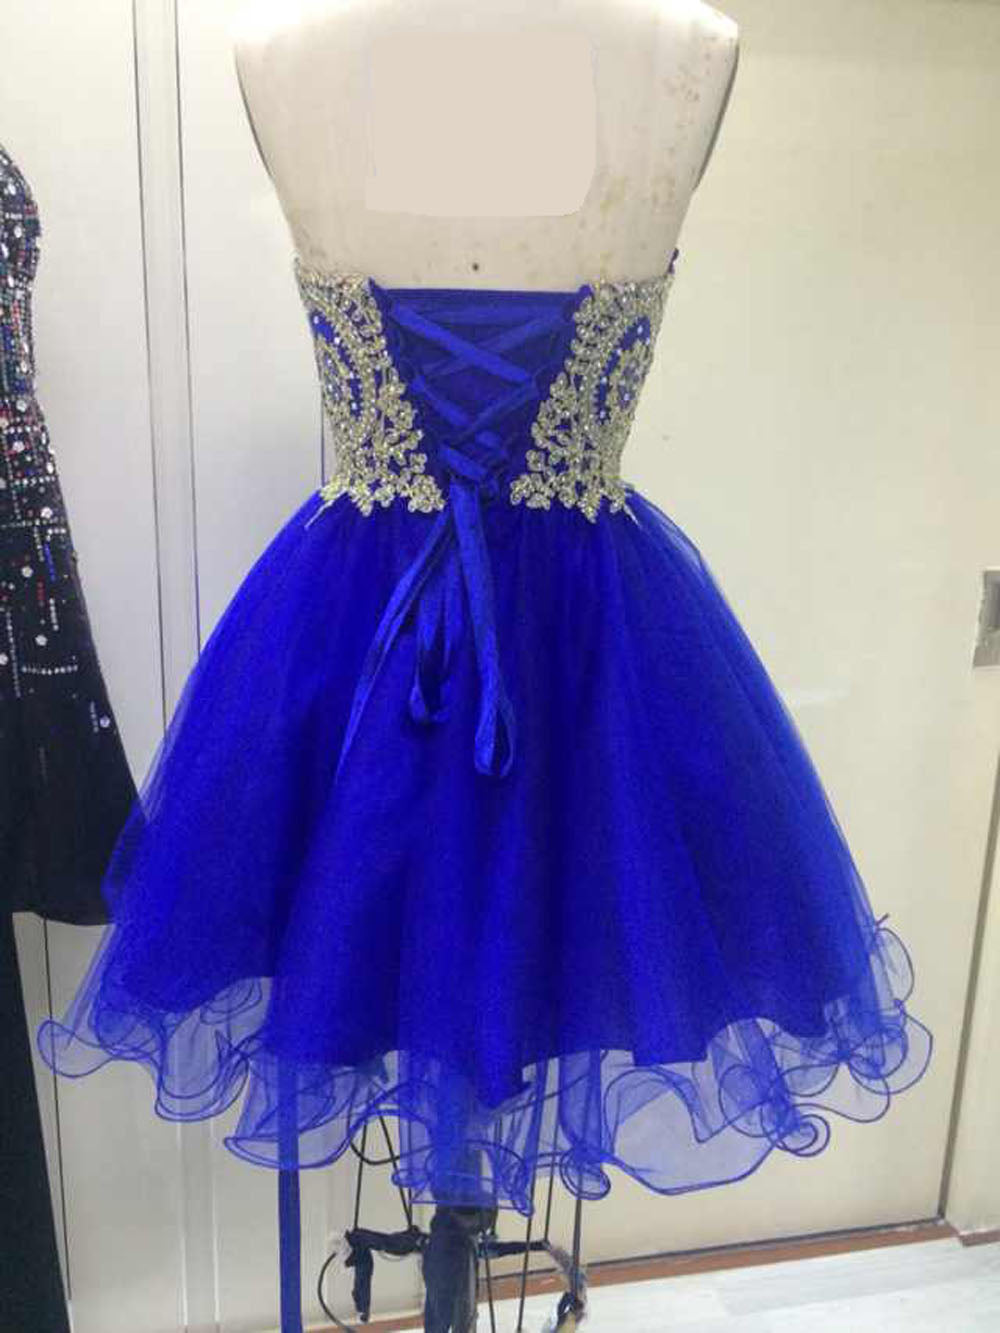 Royal Blue Tulle with Gold Applique, Short Prom Dress, Blue Homecoming Dresses